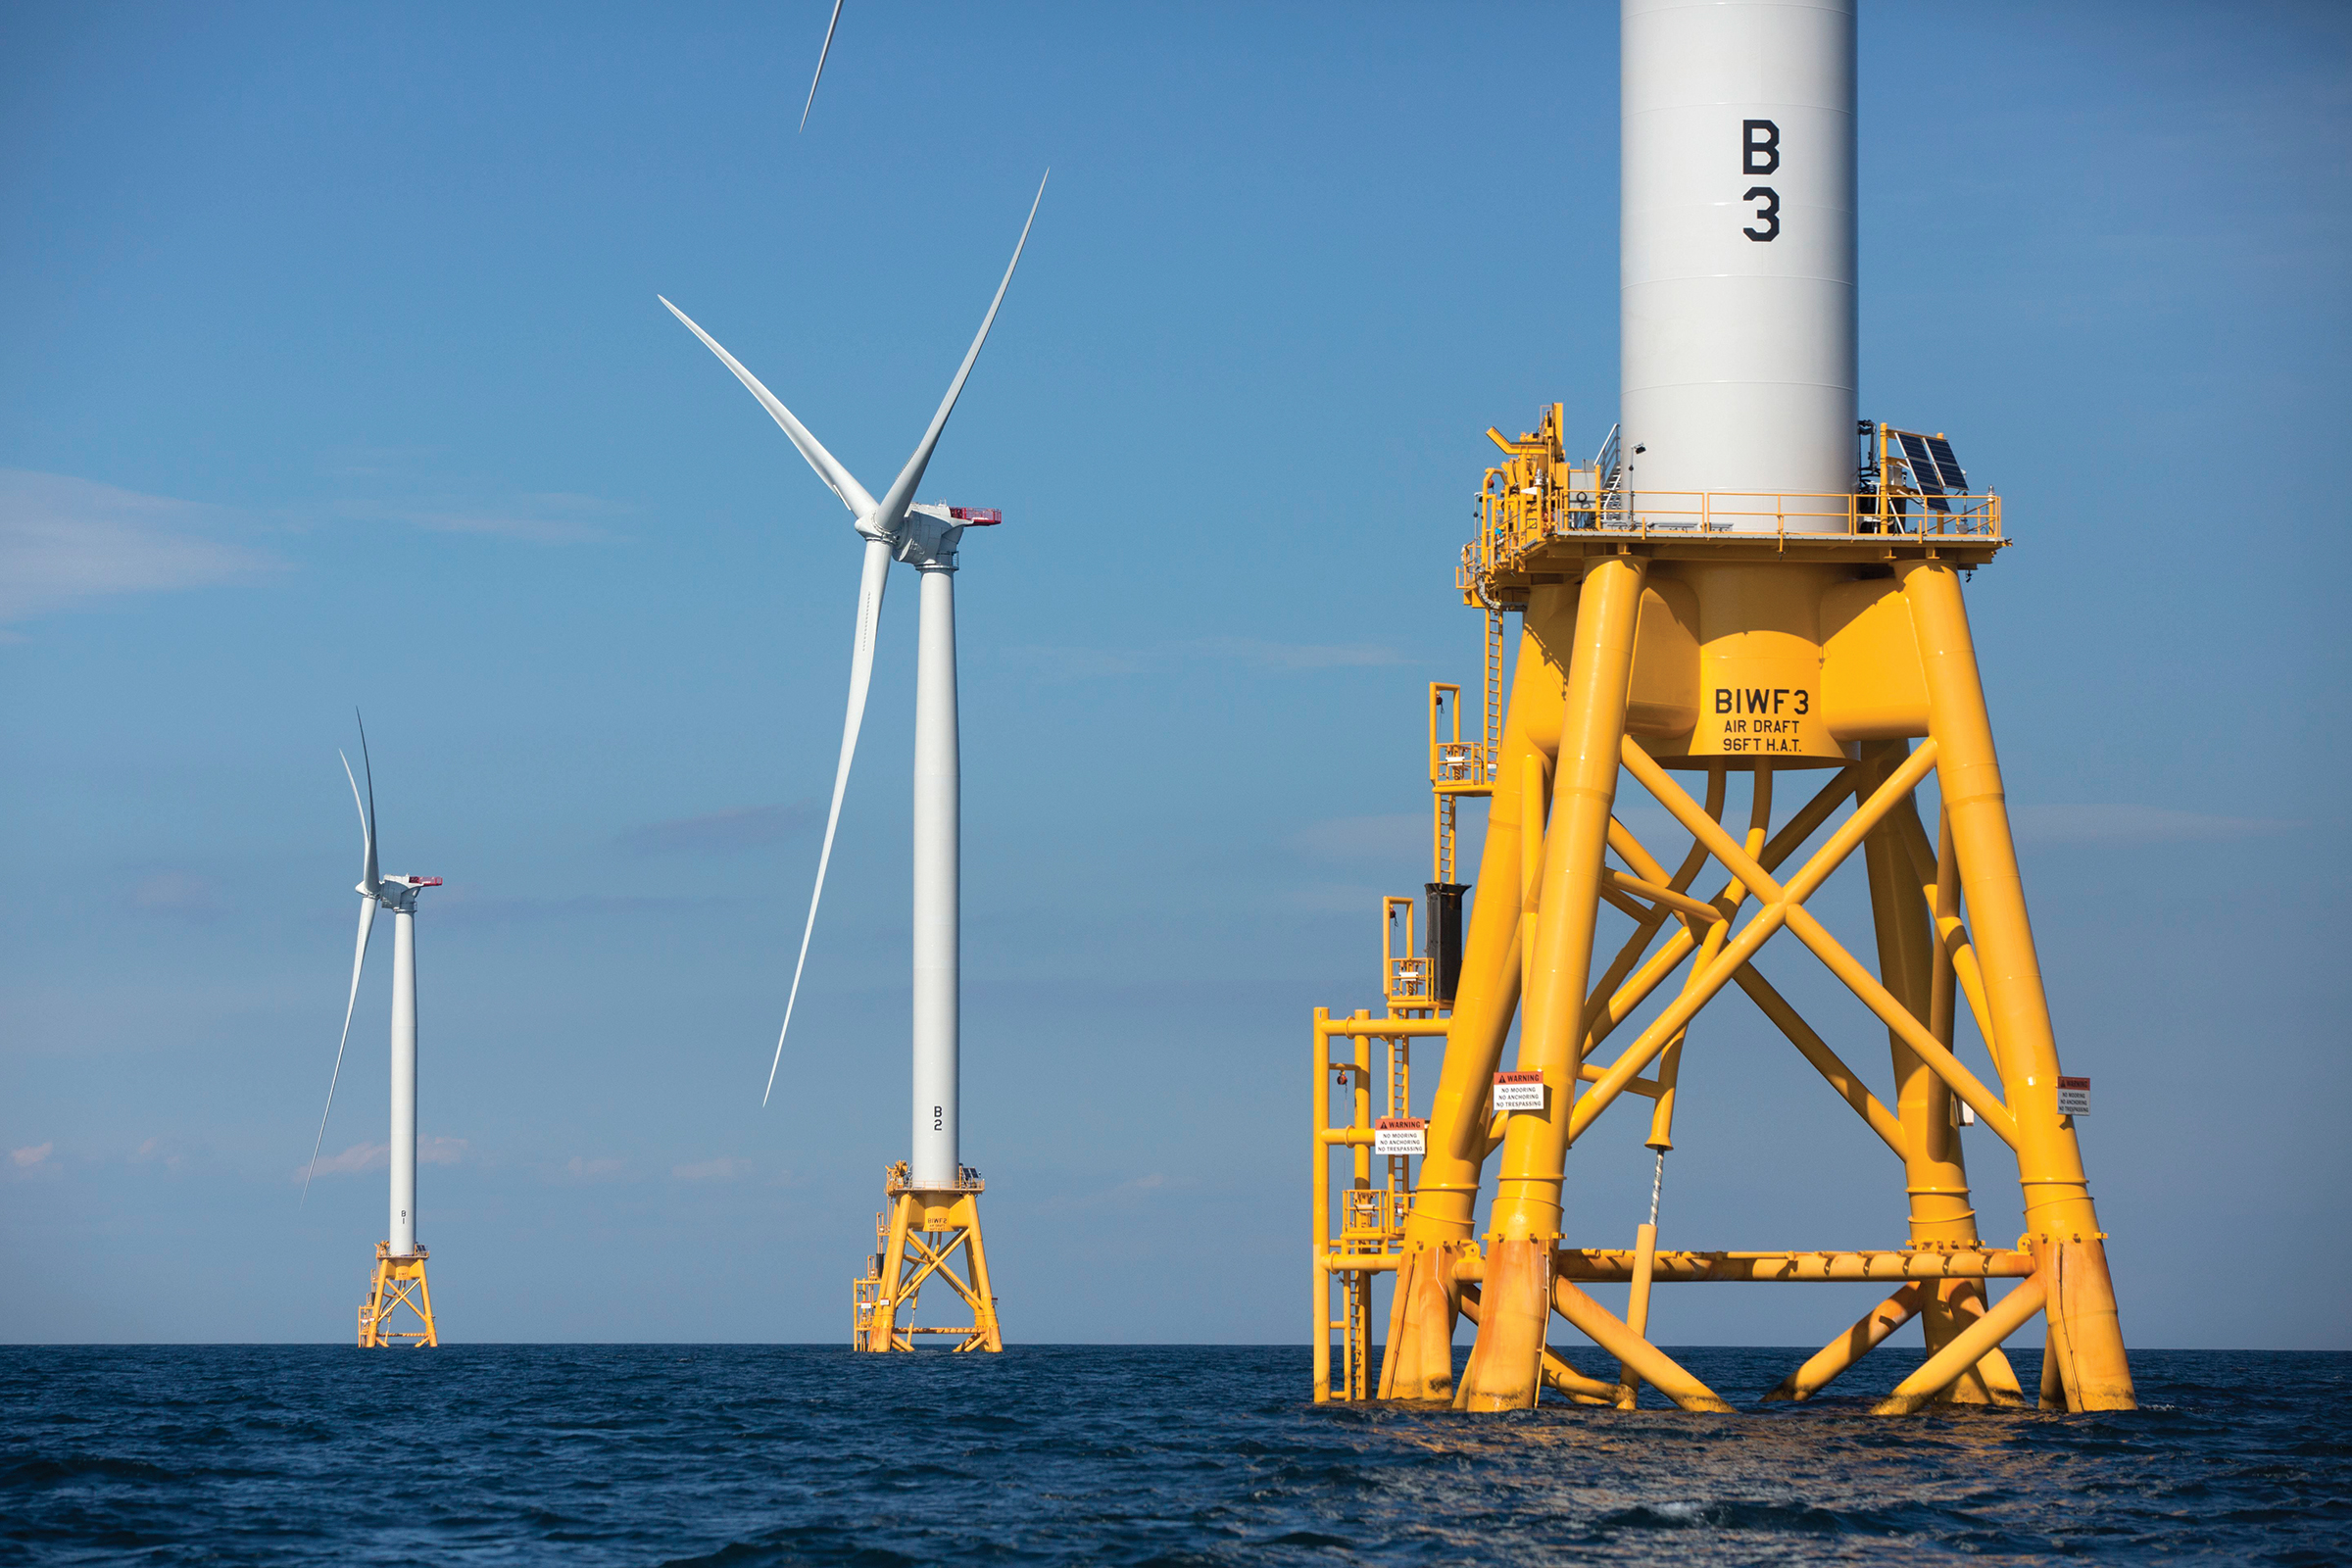 Three wind turbines from the Deepwater Wind project off Block Island, R.I., are viewed Monday, Aug. 15, 2016. Deepwater Wind's $300 million five-turbine wind farm off Block Island is expected to be operational this fall. (AP Photo/Michael Dwyer)